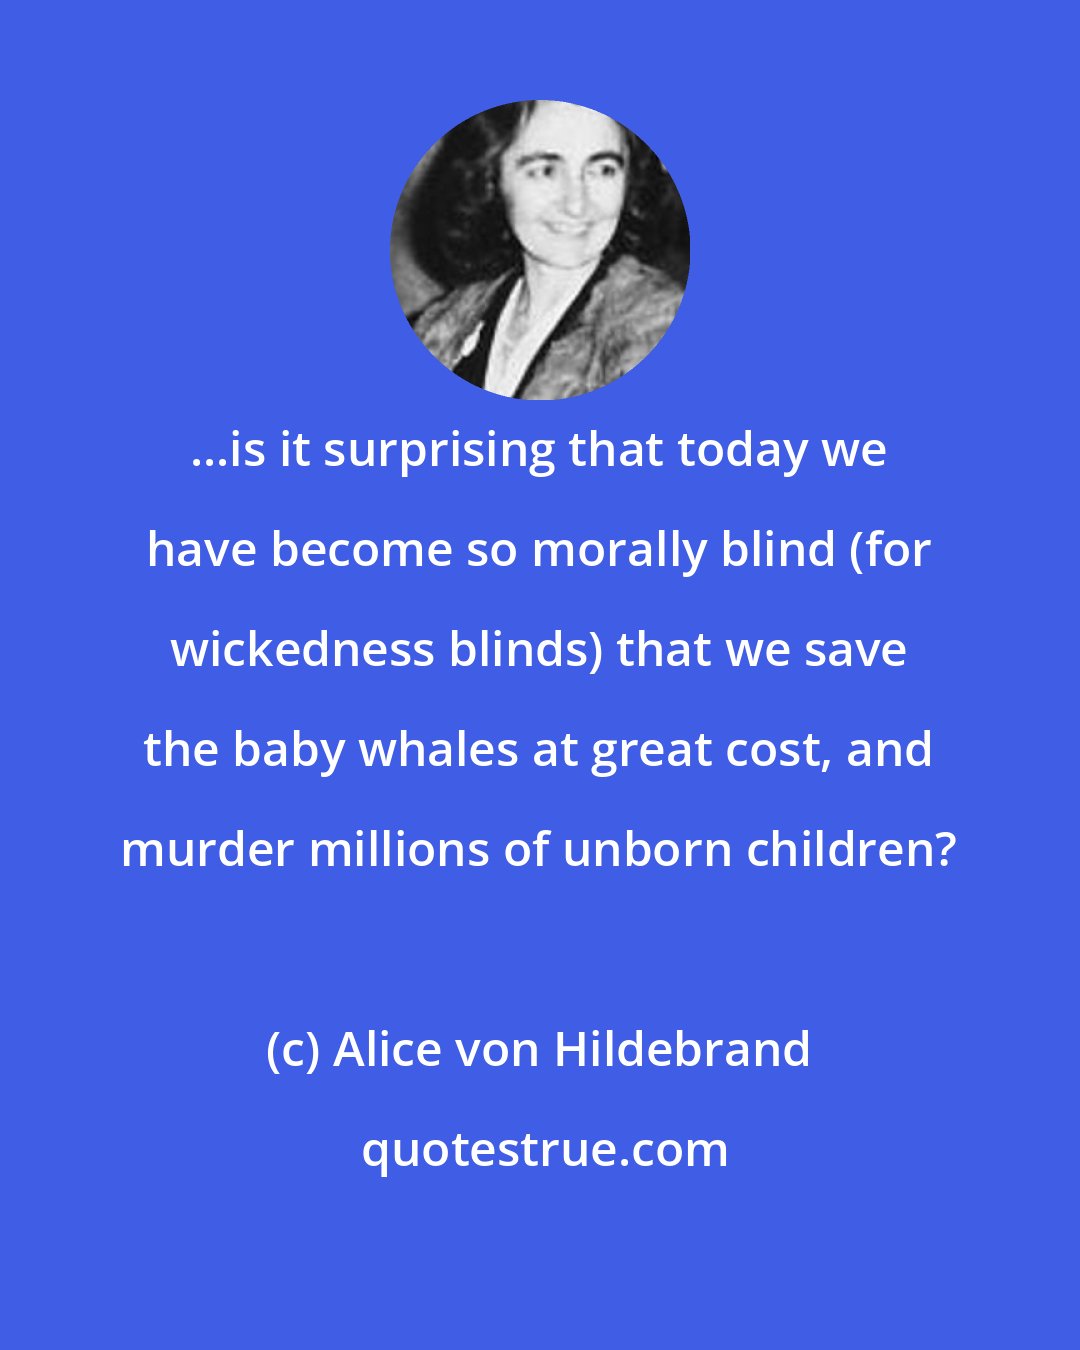 Alice von Hildebrand: ...is it surprising that today we have become so morally blind (for wickedness blinds) that we save the baby whales at great cost, and murder millions of unborn children?